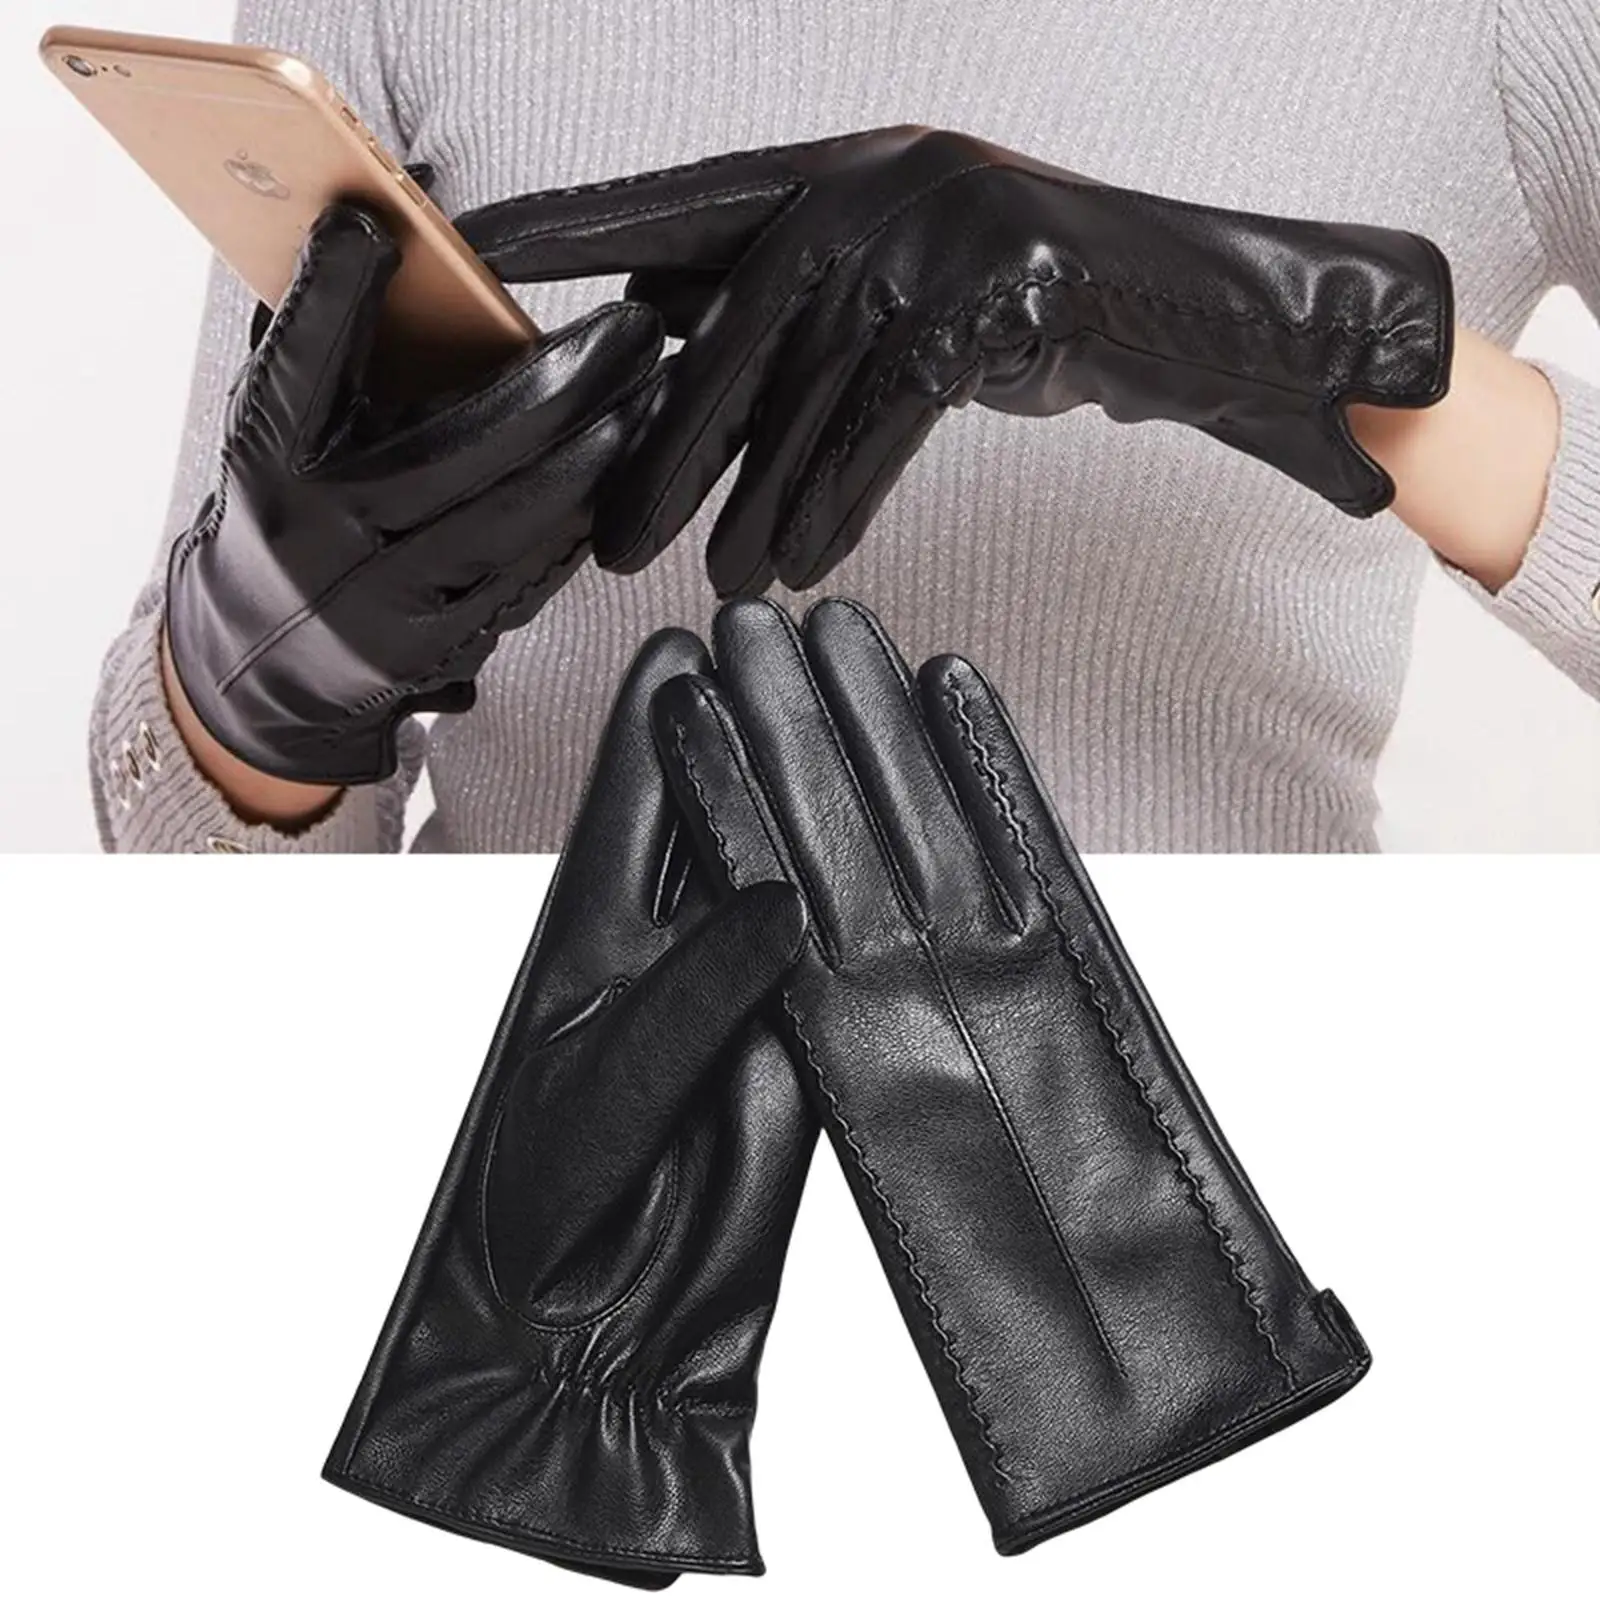 Women Winter Warm Gloves Touch Screen for Cycling Skiing Driving Riding Outdoor